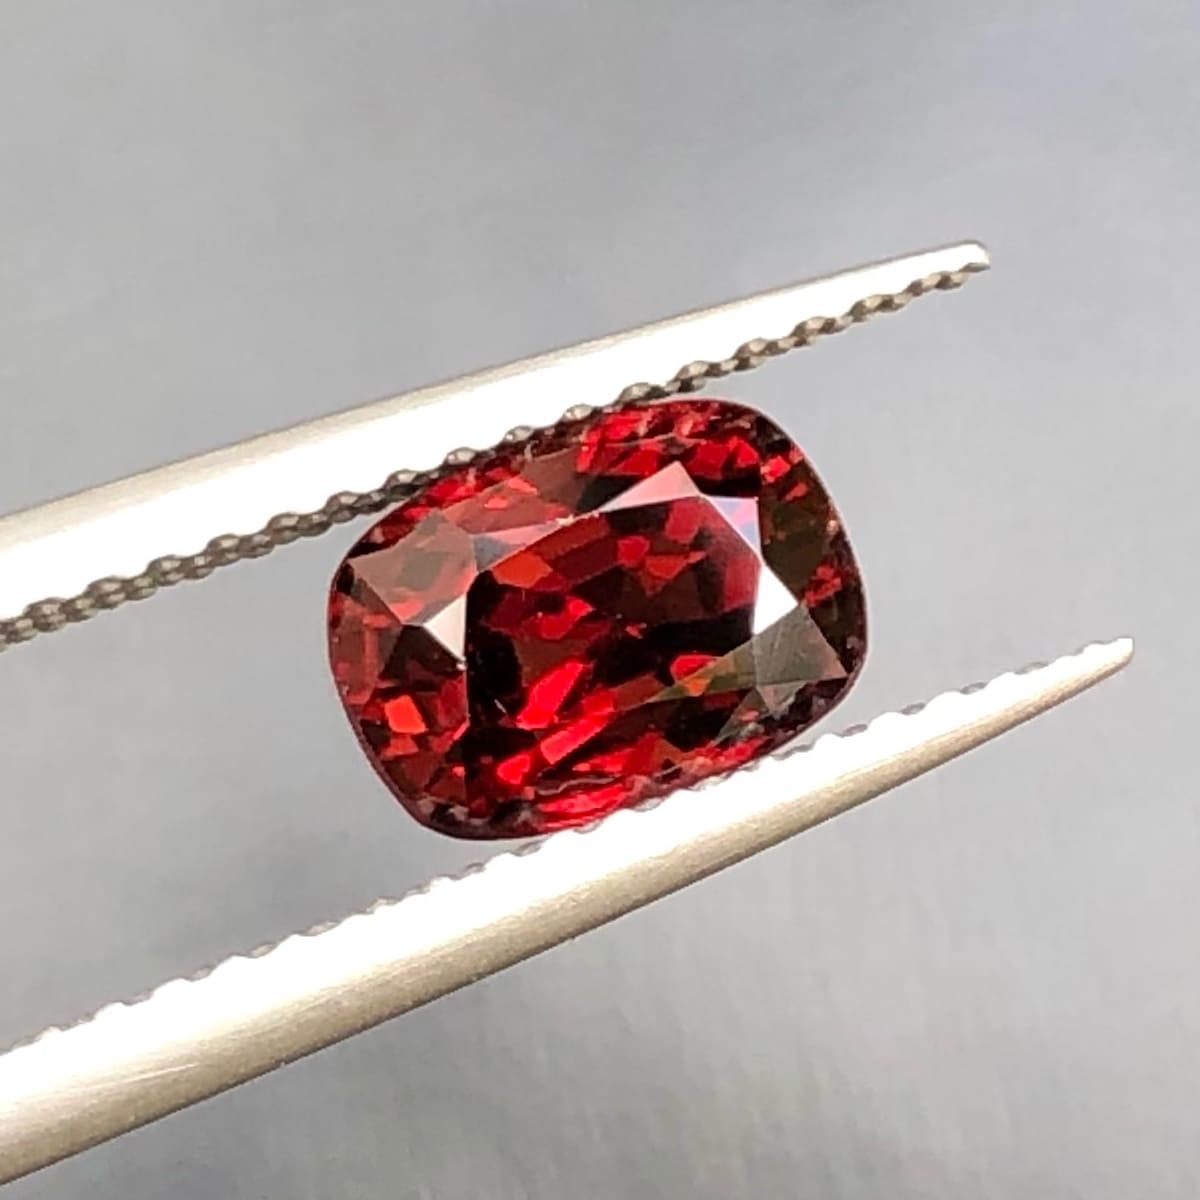 Hot Red Spinel - 1.50 carat